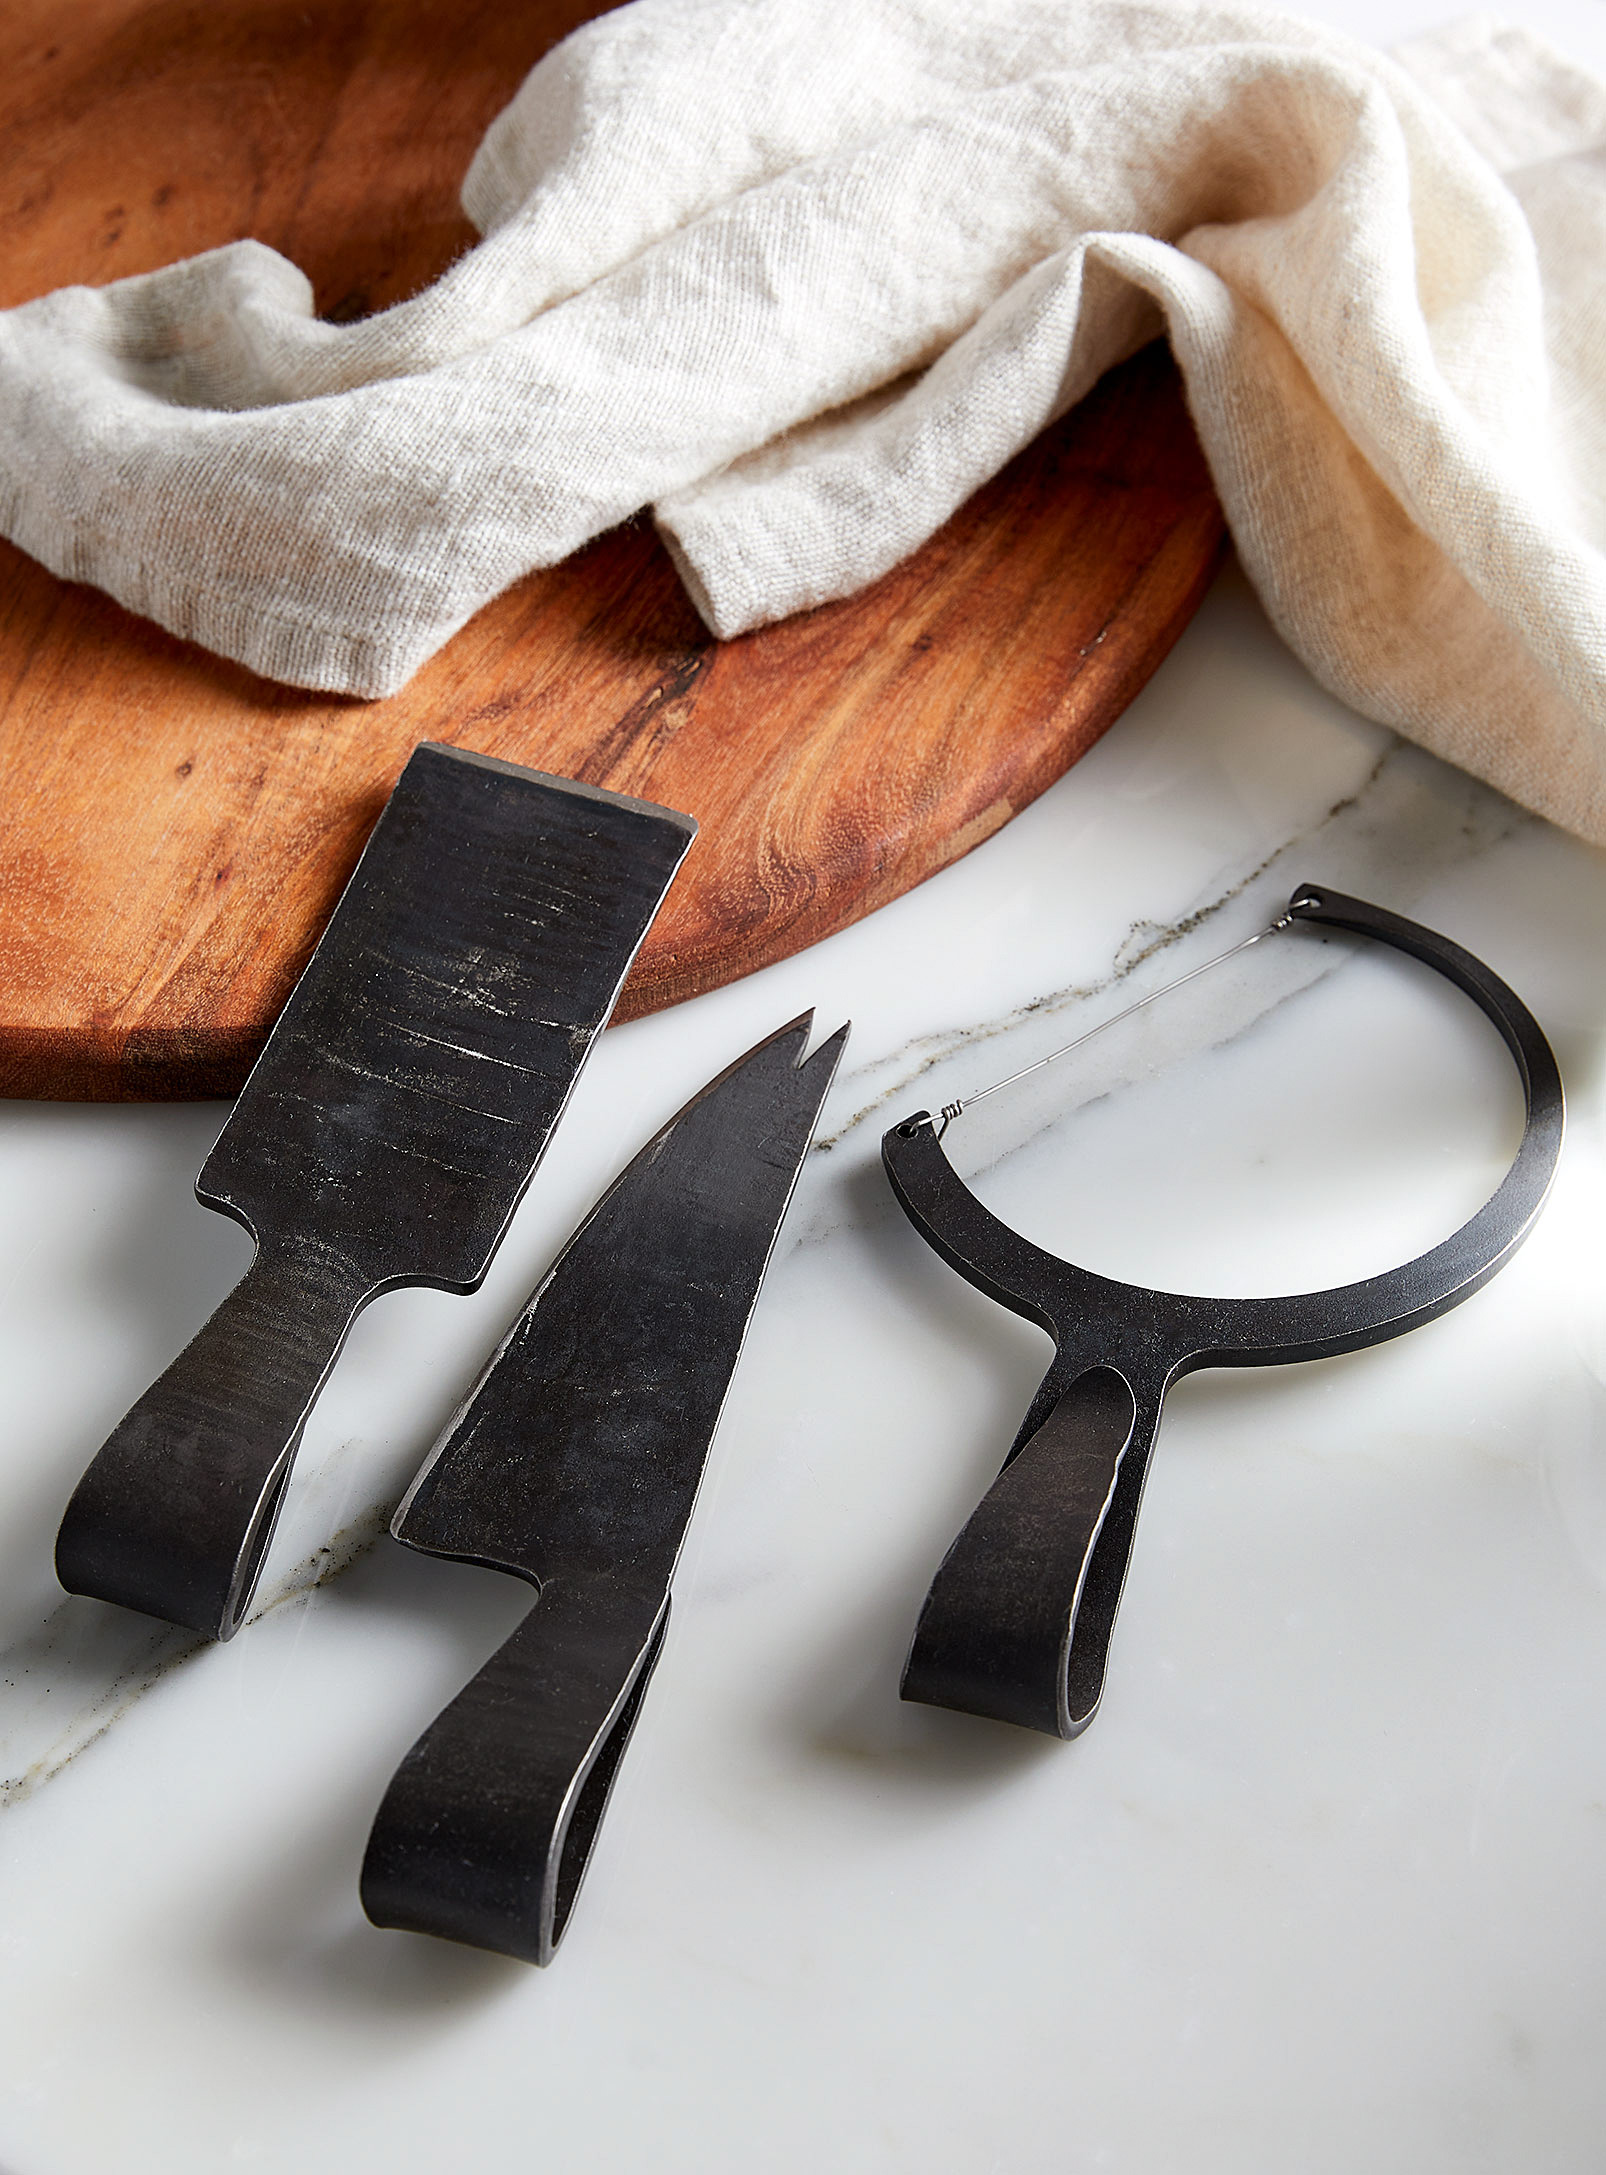 Cloverdale Forge Trio Of Forged Cheese Knives In Black